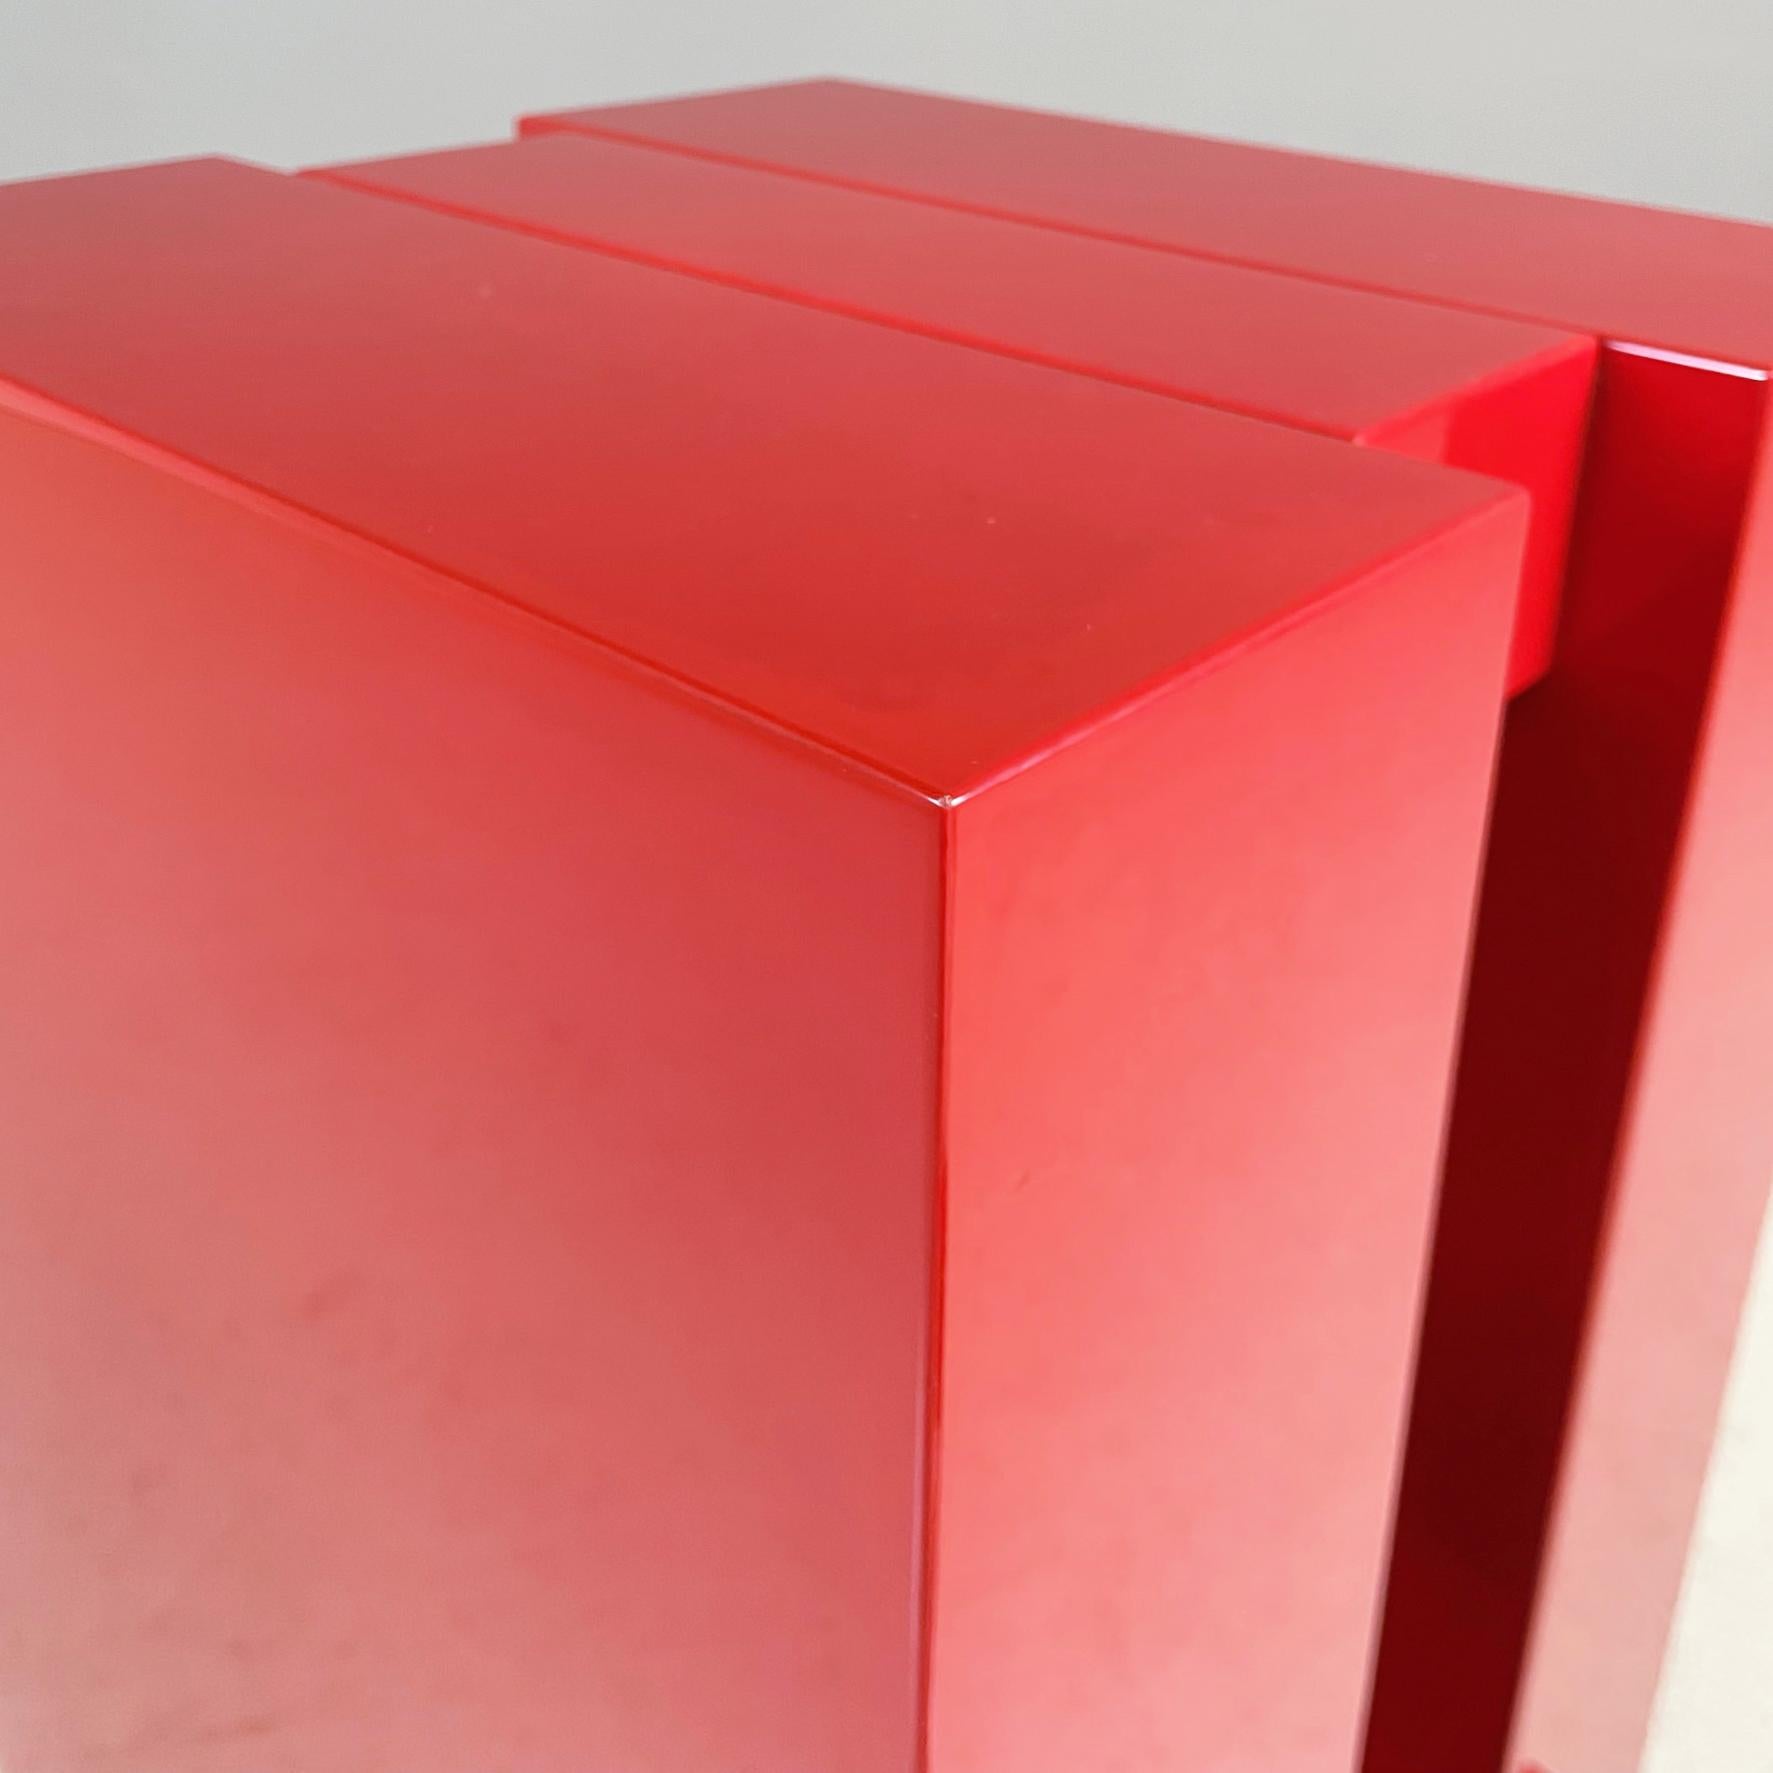 Italian Midcentury Geometric Pedestal in Red Lacquered Wood, 1980s For Sale 1